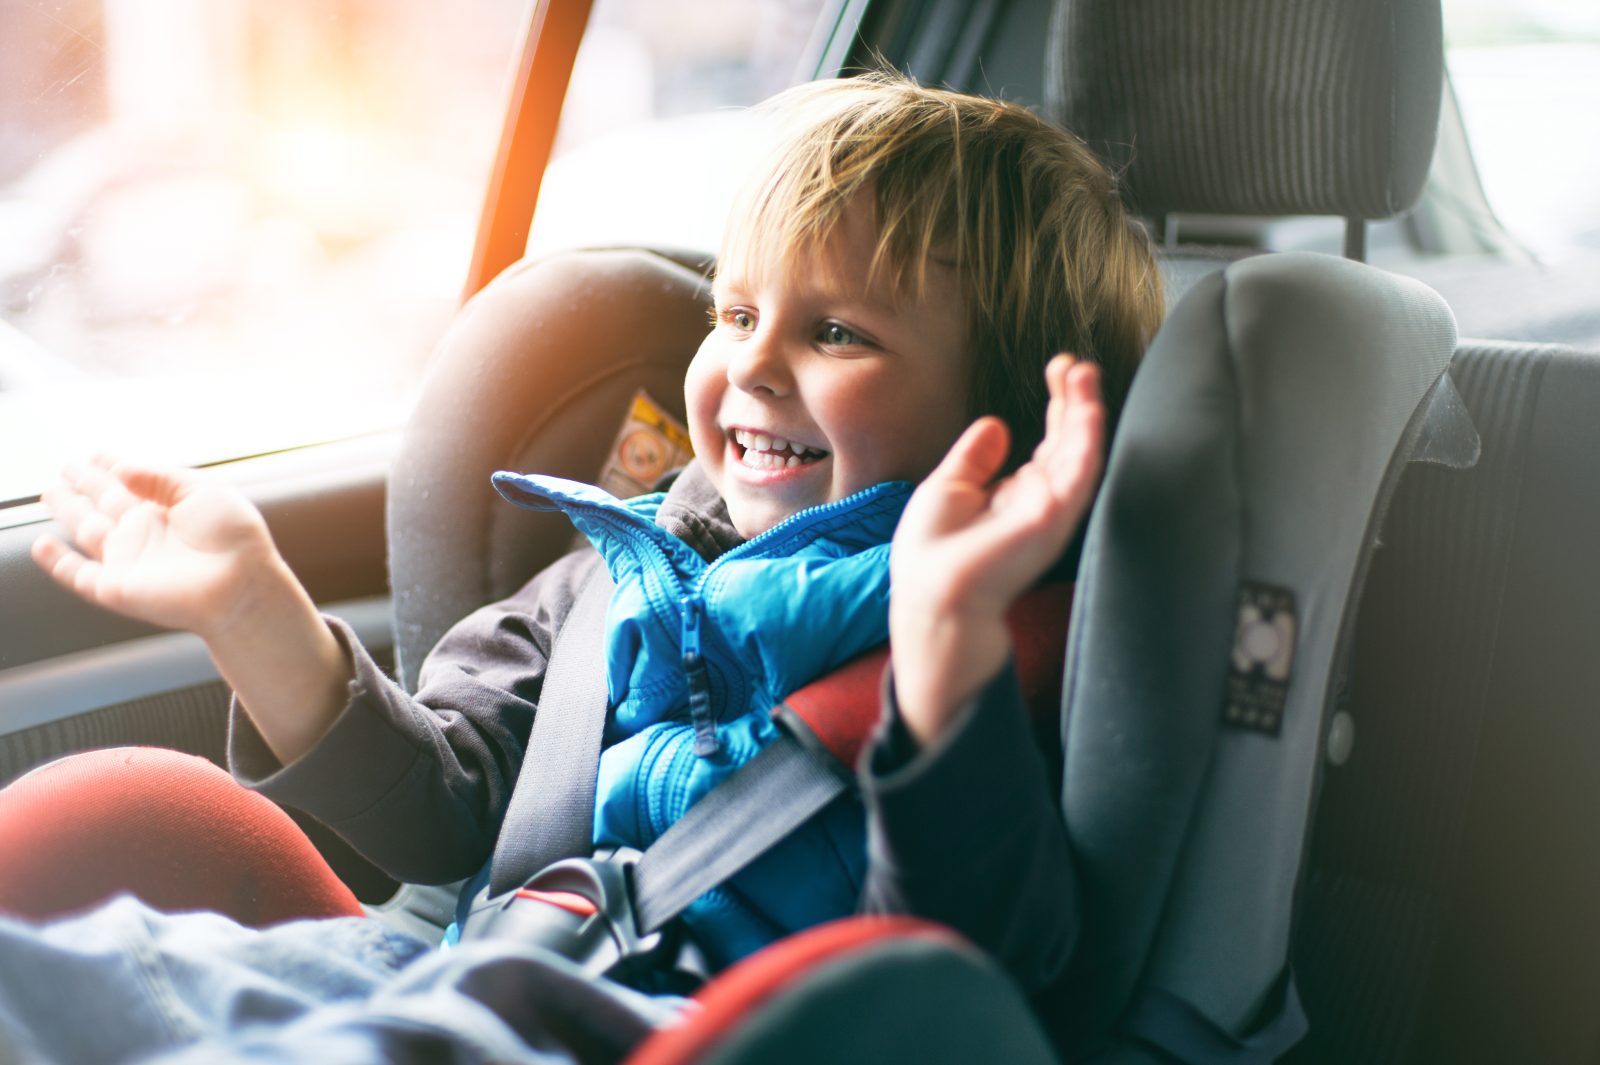 How to keep children safe in the car